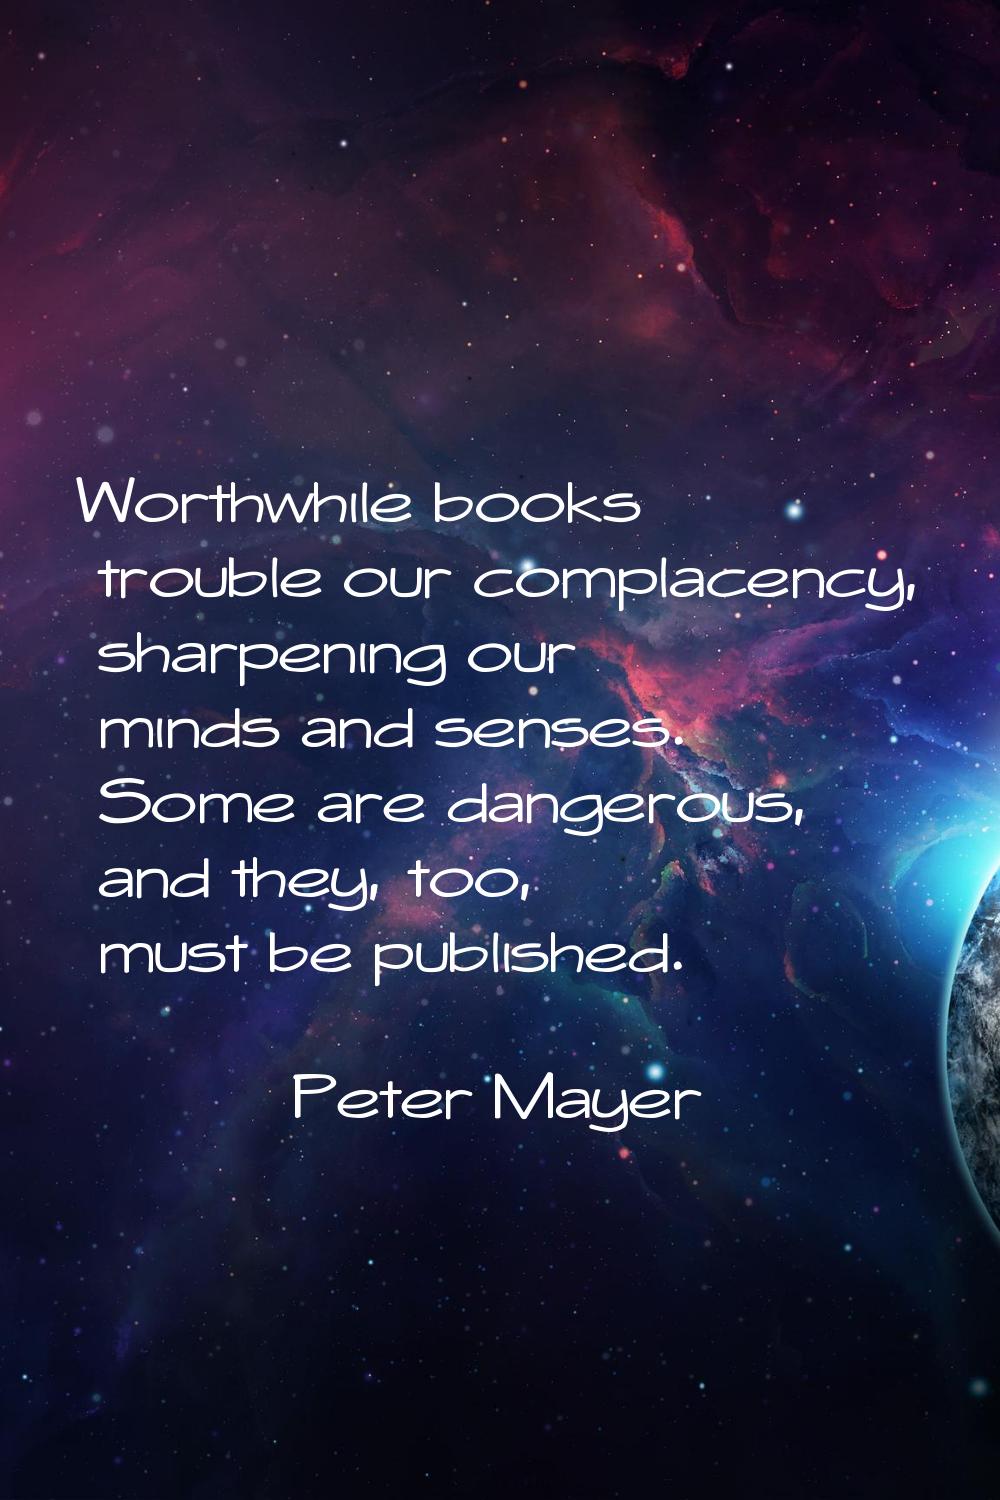 Worthwhile books trouble our complacency, sharpening our minds and senses. Some are dangerous, and 